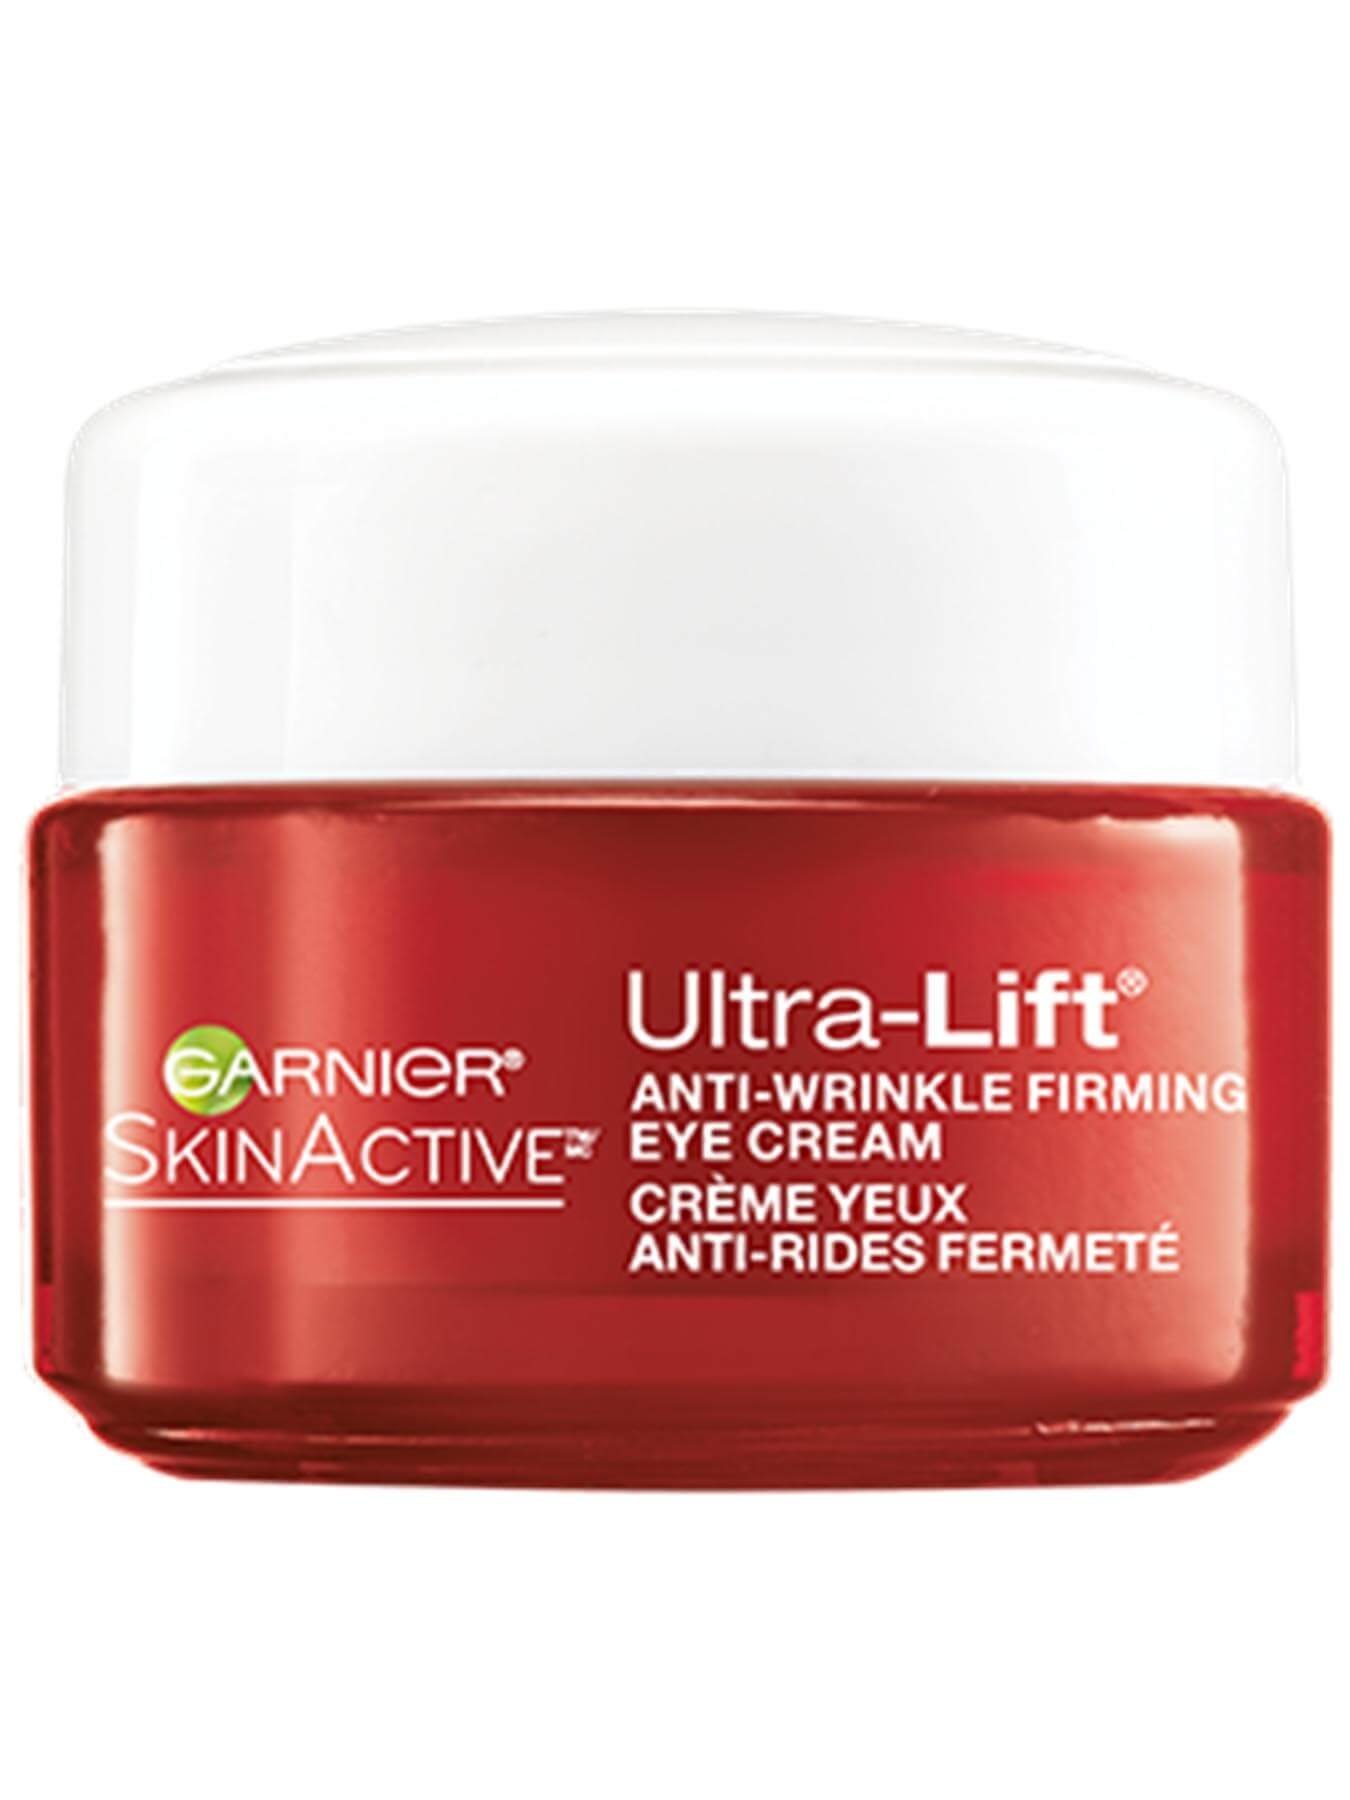 Front view of Ultra-Lift Anti-Wrinkle Eye Cream.